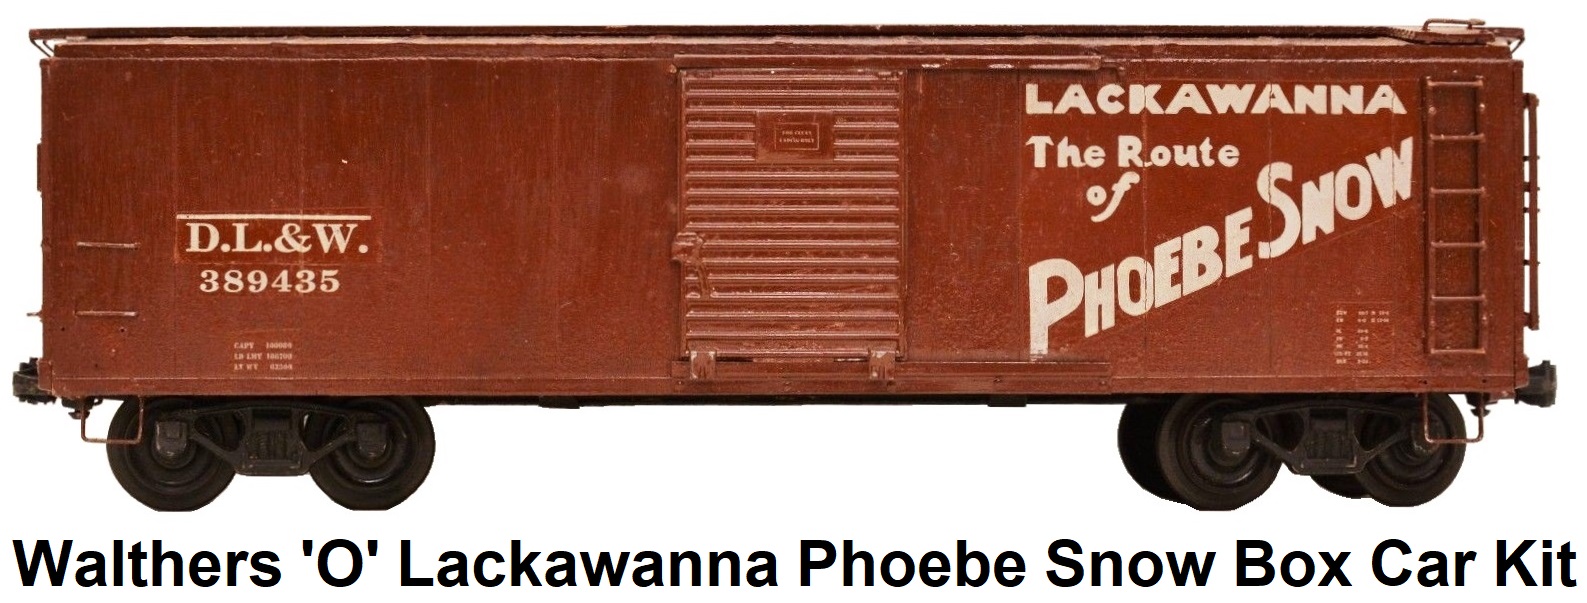 Walthers 'O' Scale Lackawanna Phoebe Snow Assembled Box Car Kit made of Wood and Metal